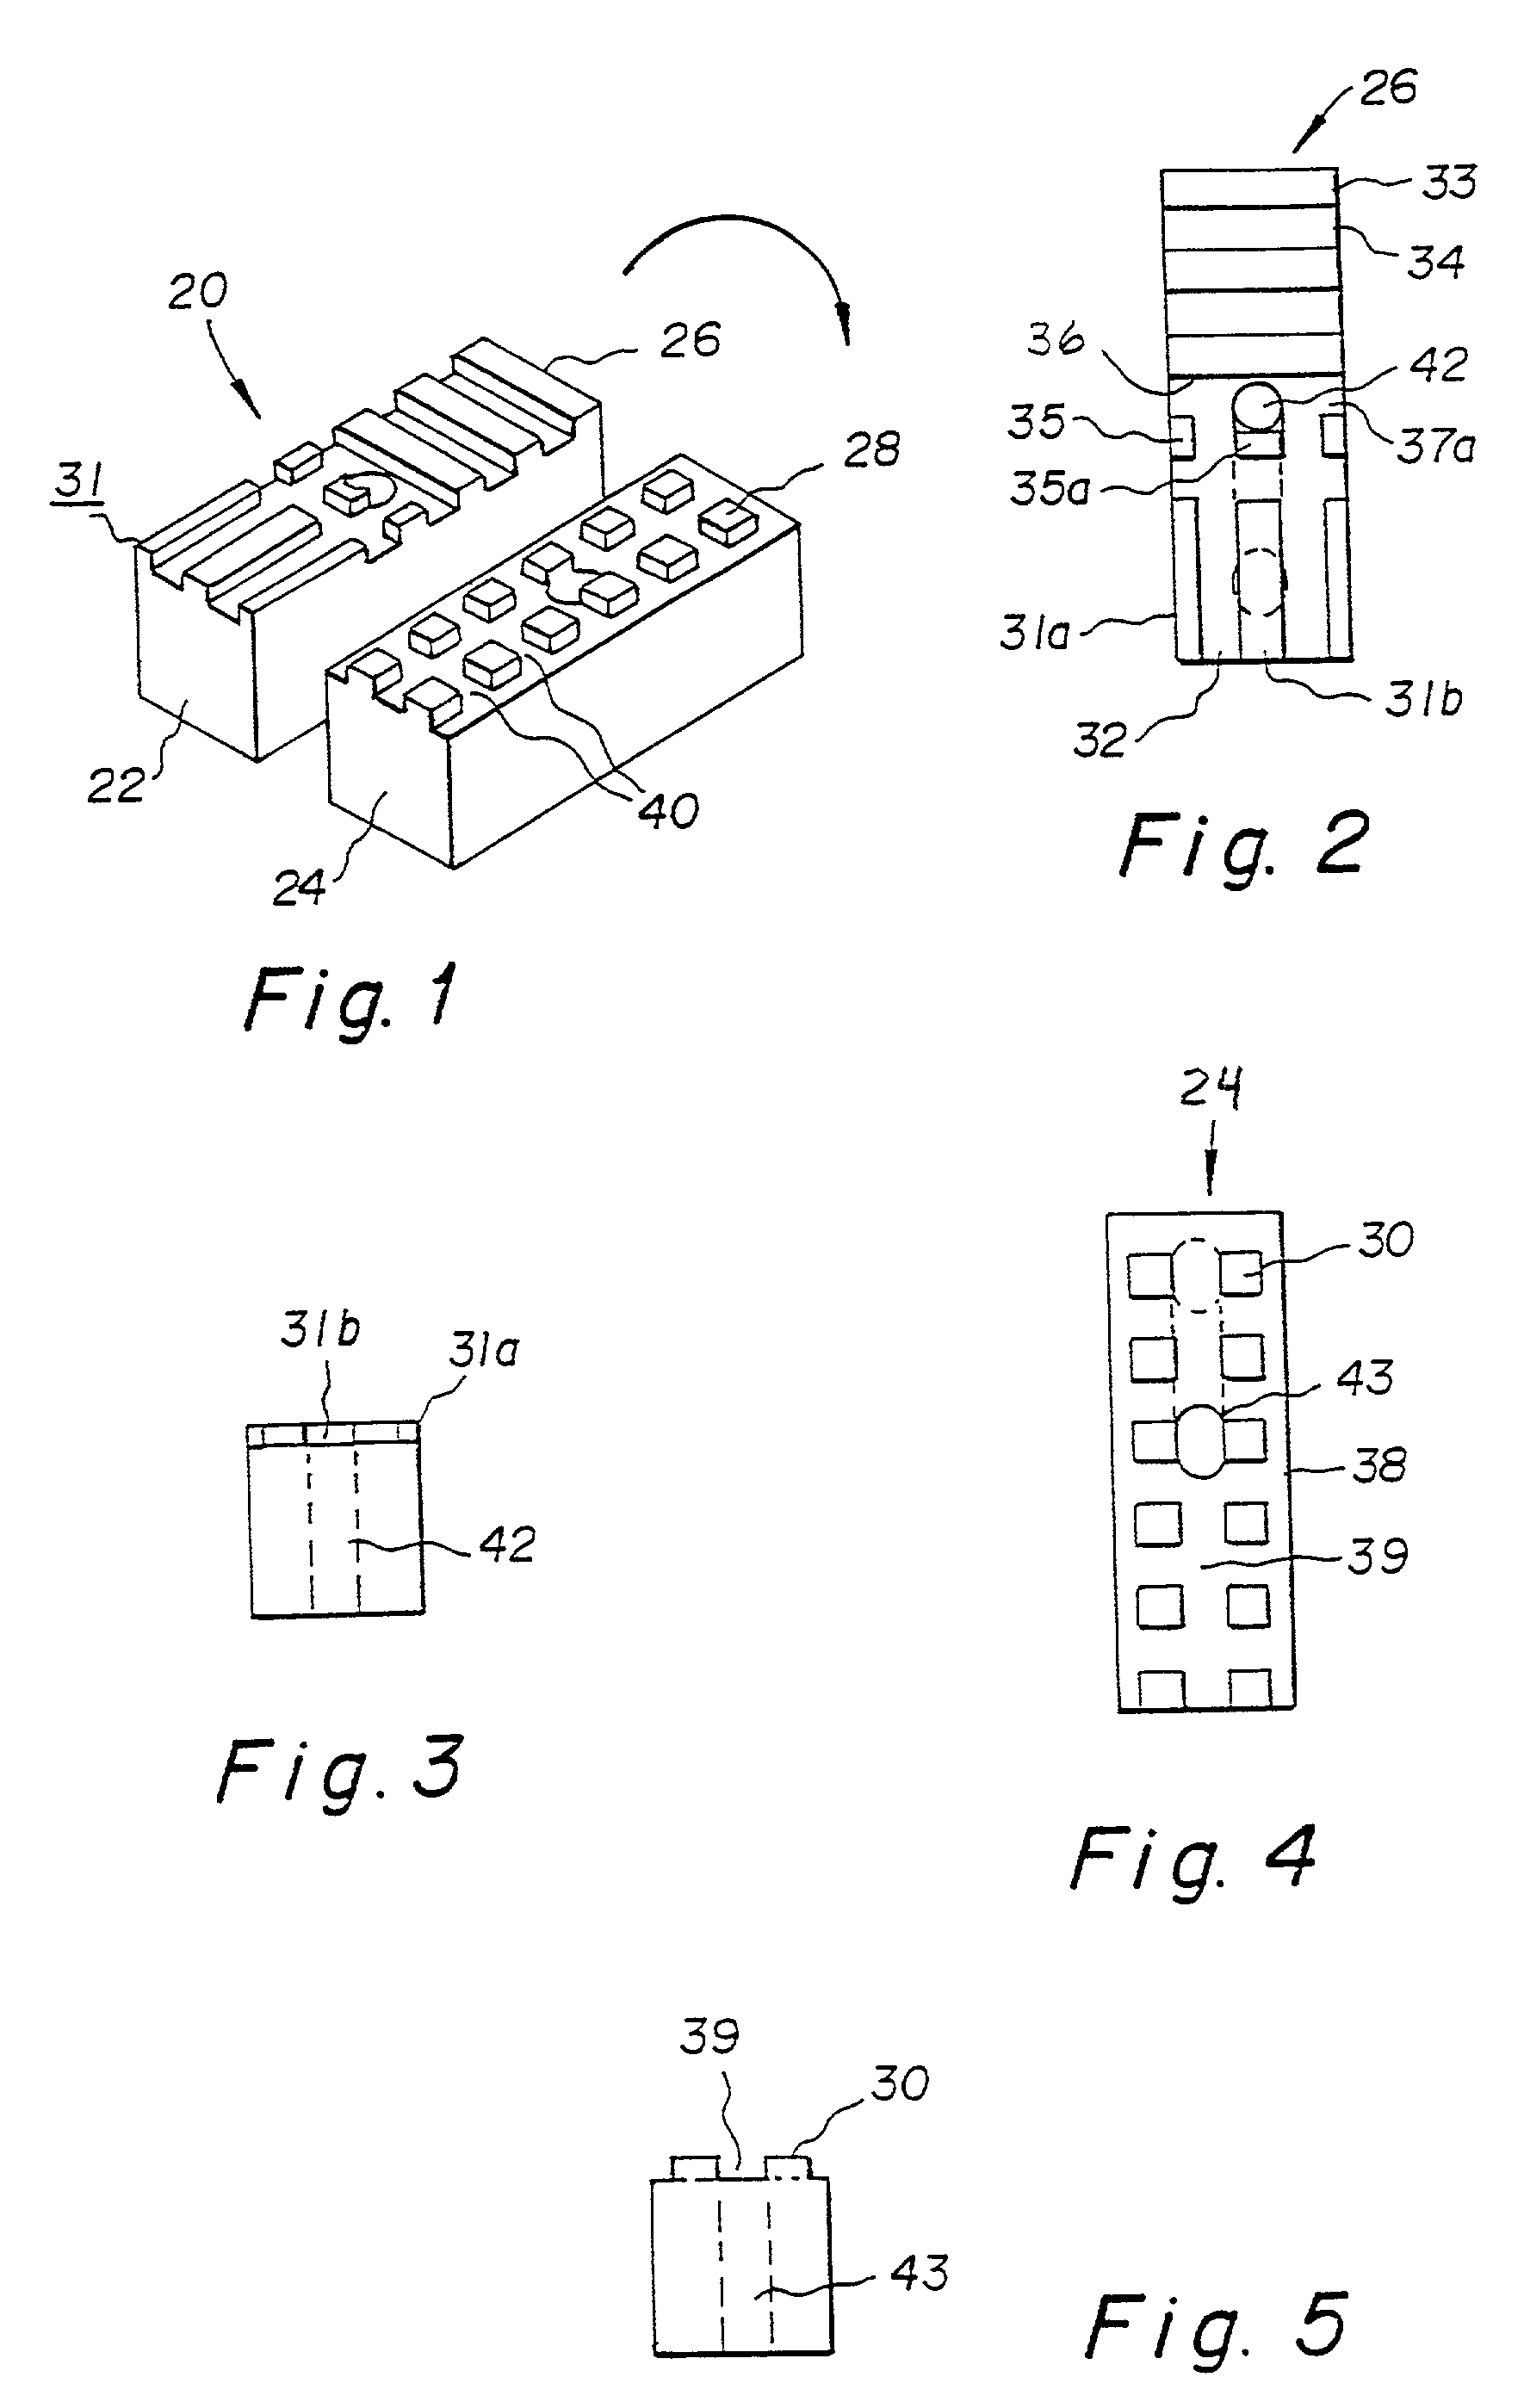 Compound bone structure of allograft tissue with threaded fasteners